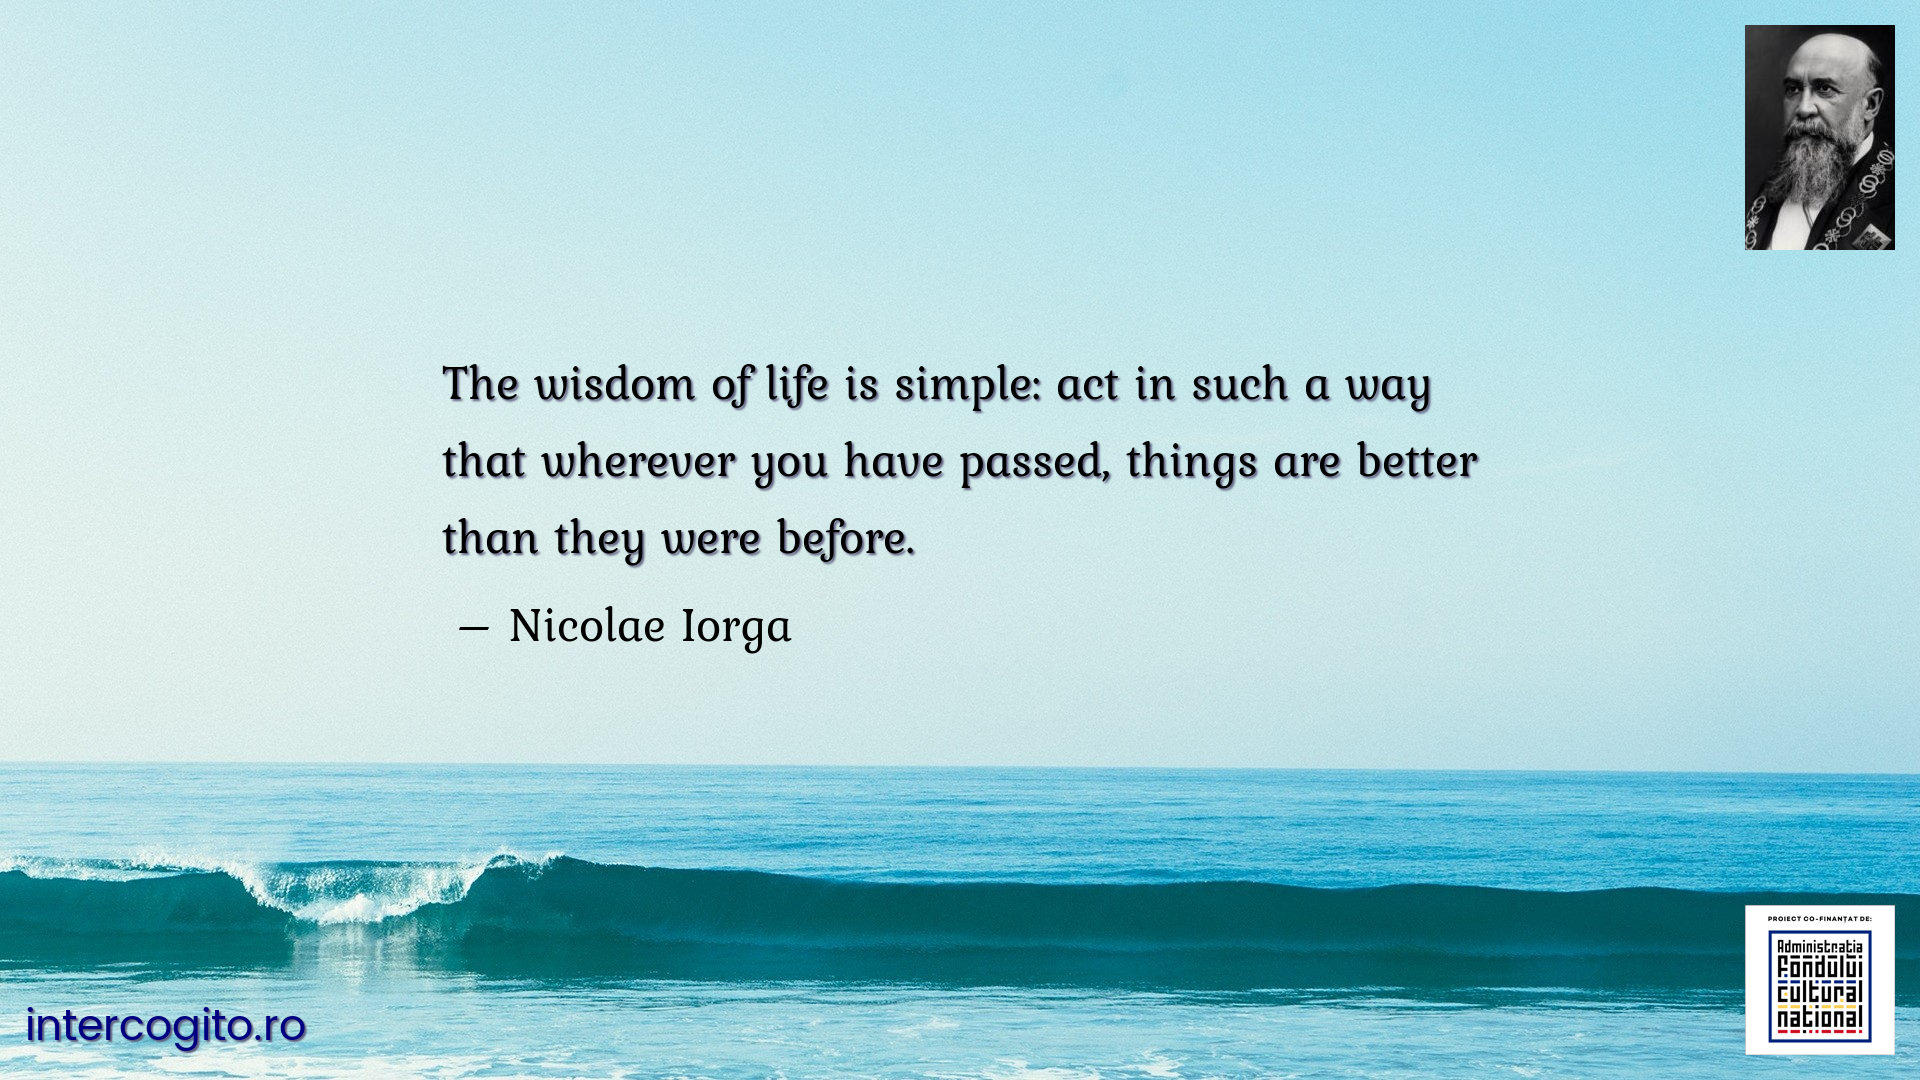 The wisdom of life is simple: act in such a way that wherever you have passed, things are better than they were before.